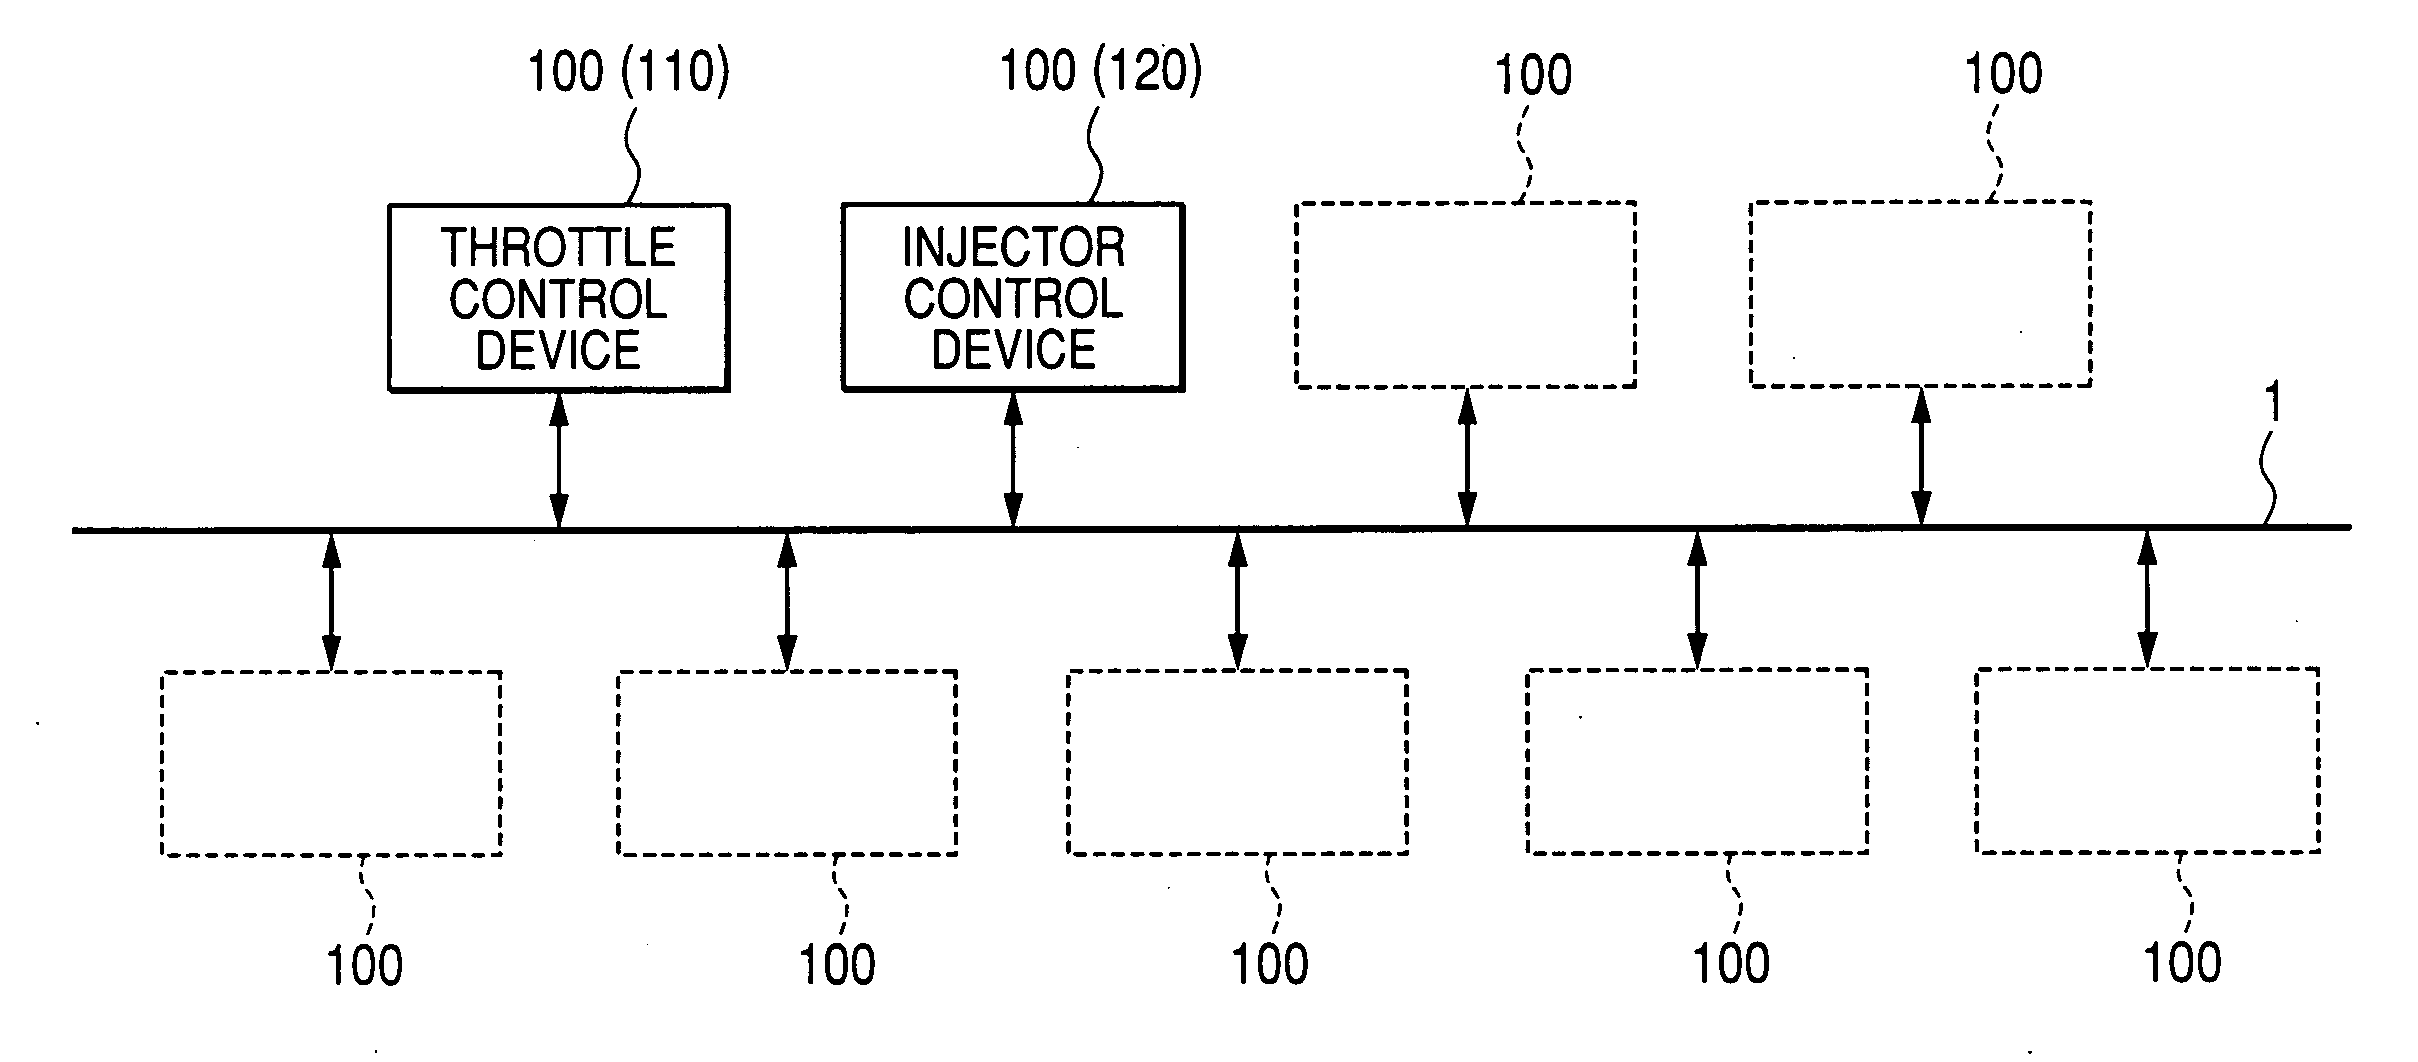 Electronic control units for controlling in-vehicle devices using time-dependent data and vehicle control system integrating such units for real-time distributed control